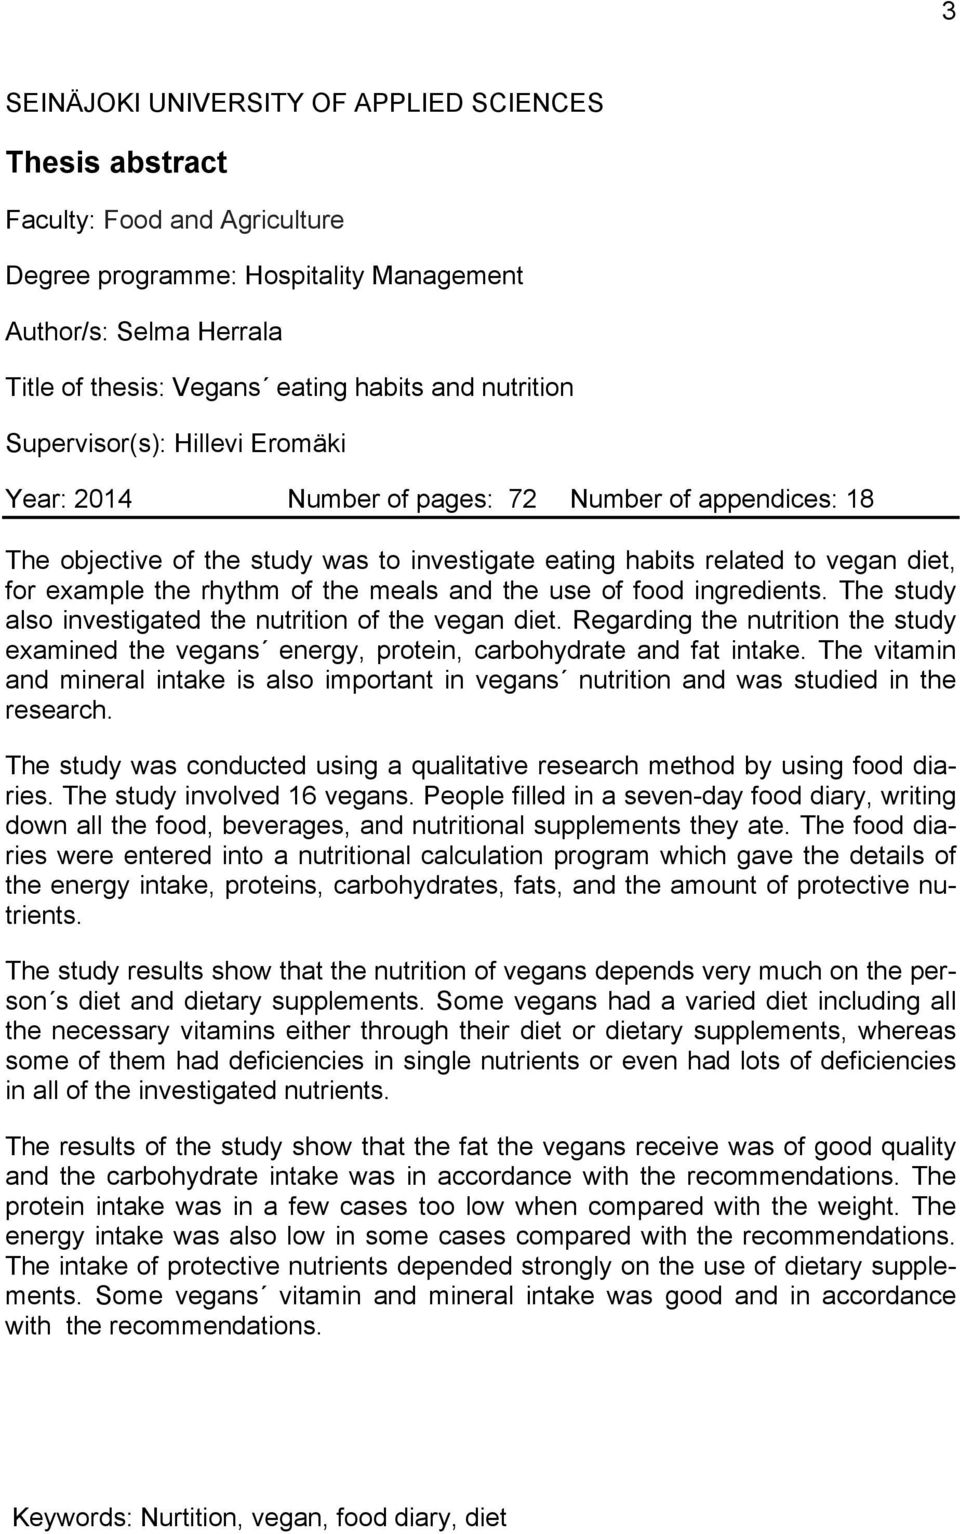 rhythm of the meals and the use of food ingredients. The study also investigated the nutrition of the vegan diet.